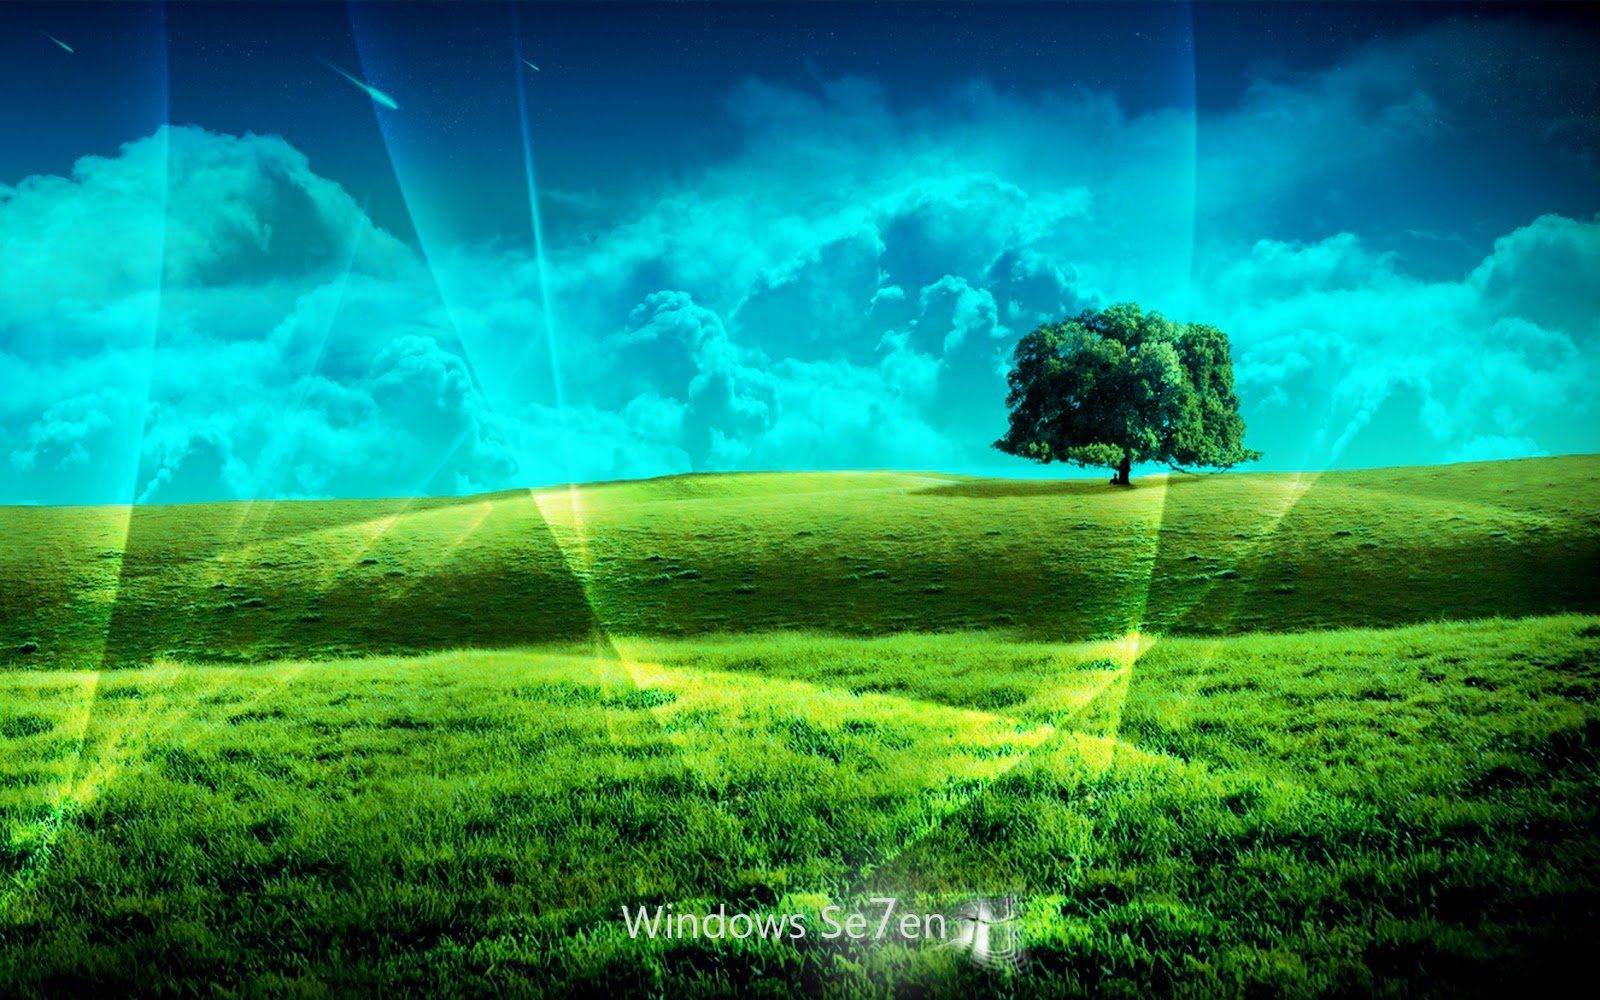 Windows 7 Natural Desktop Best Quality Wallpapers here you can see